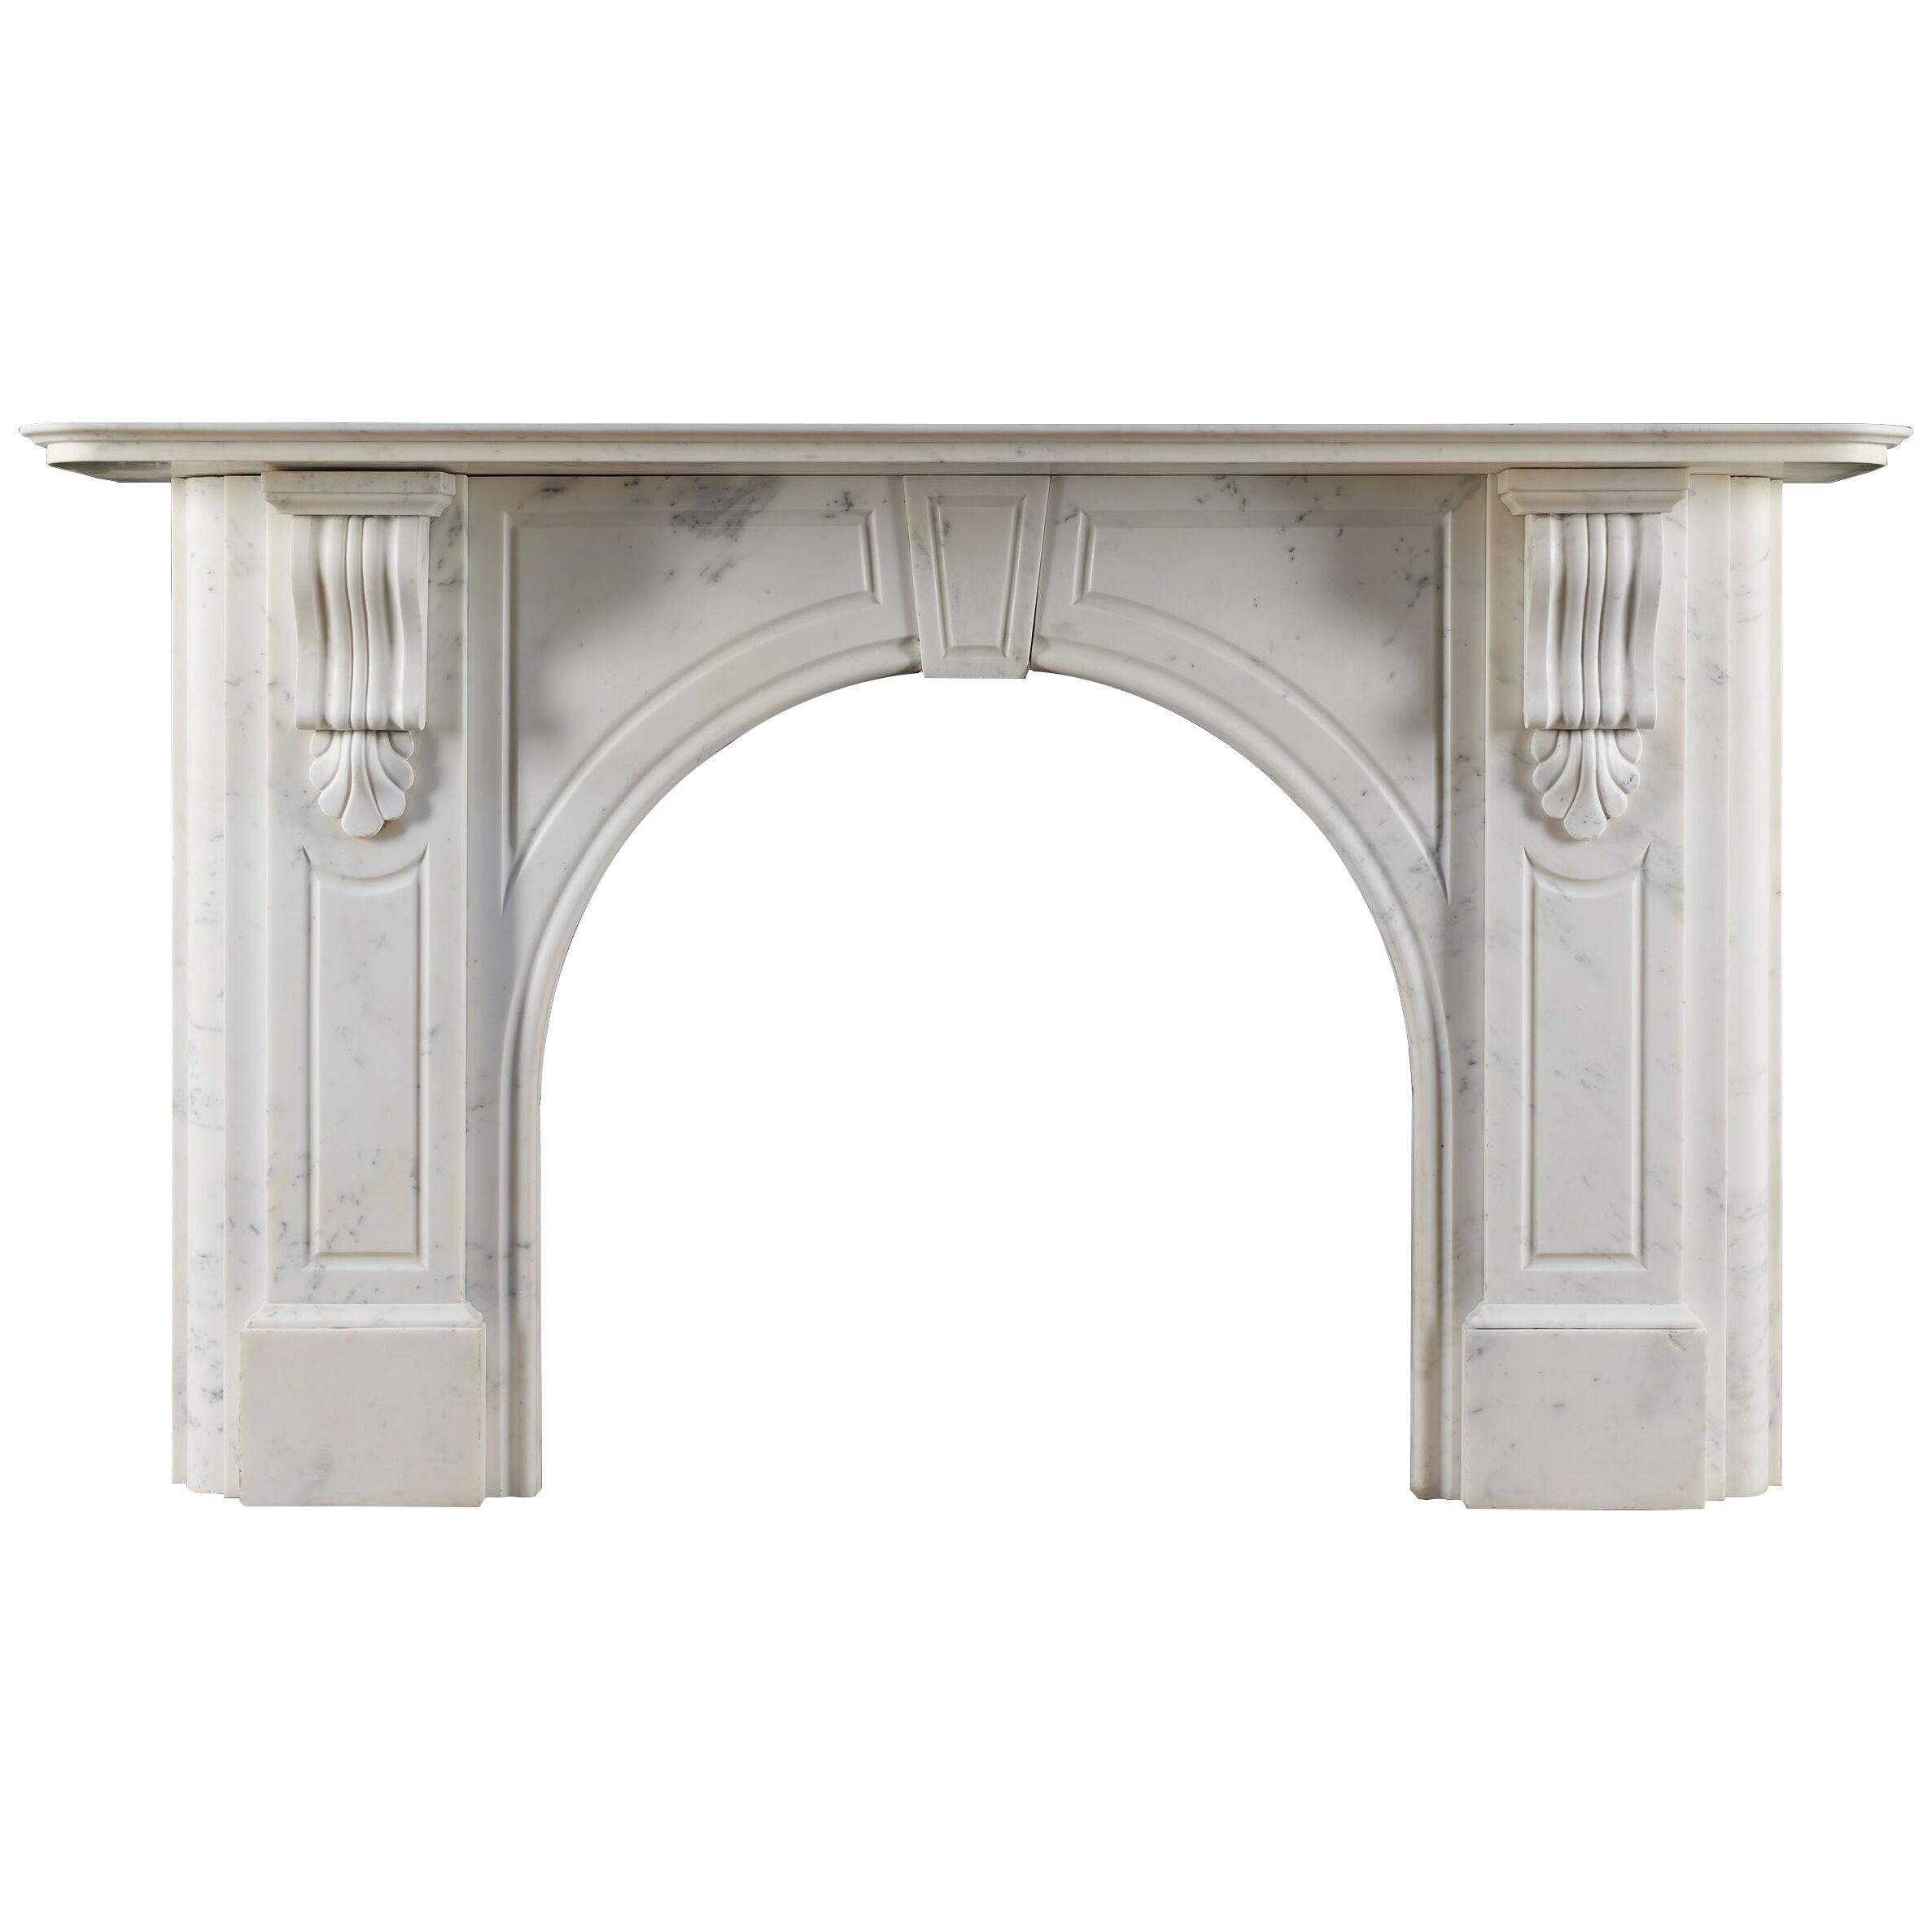 A Victorian Statuary Marble Arched Fireplace